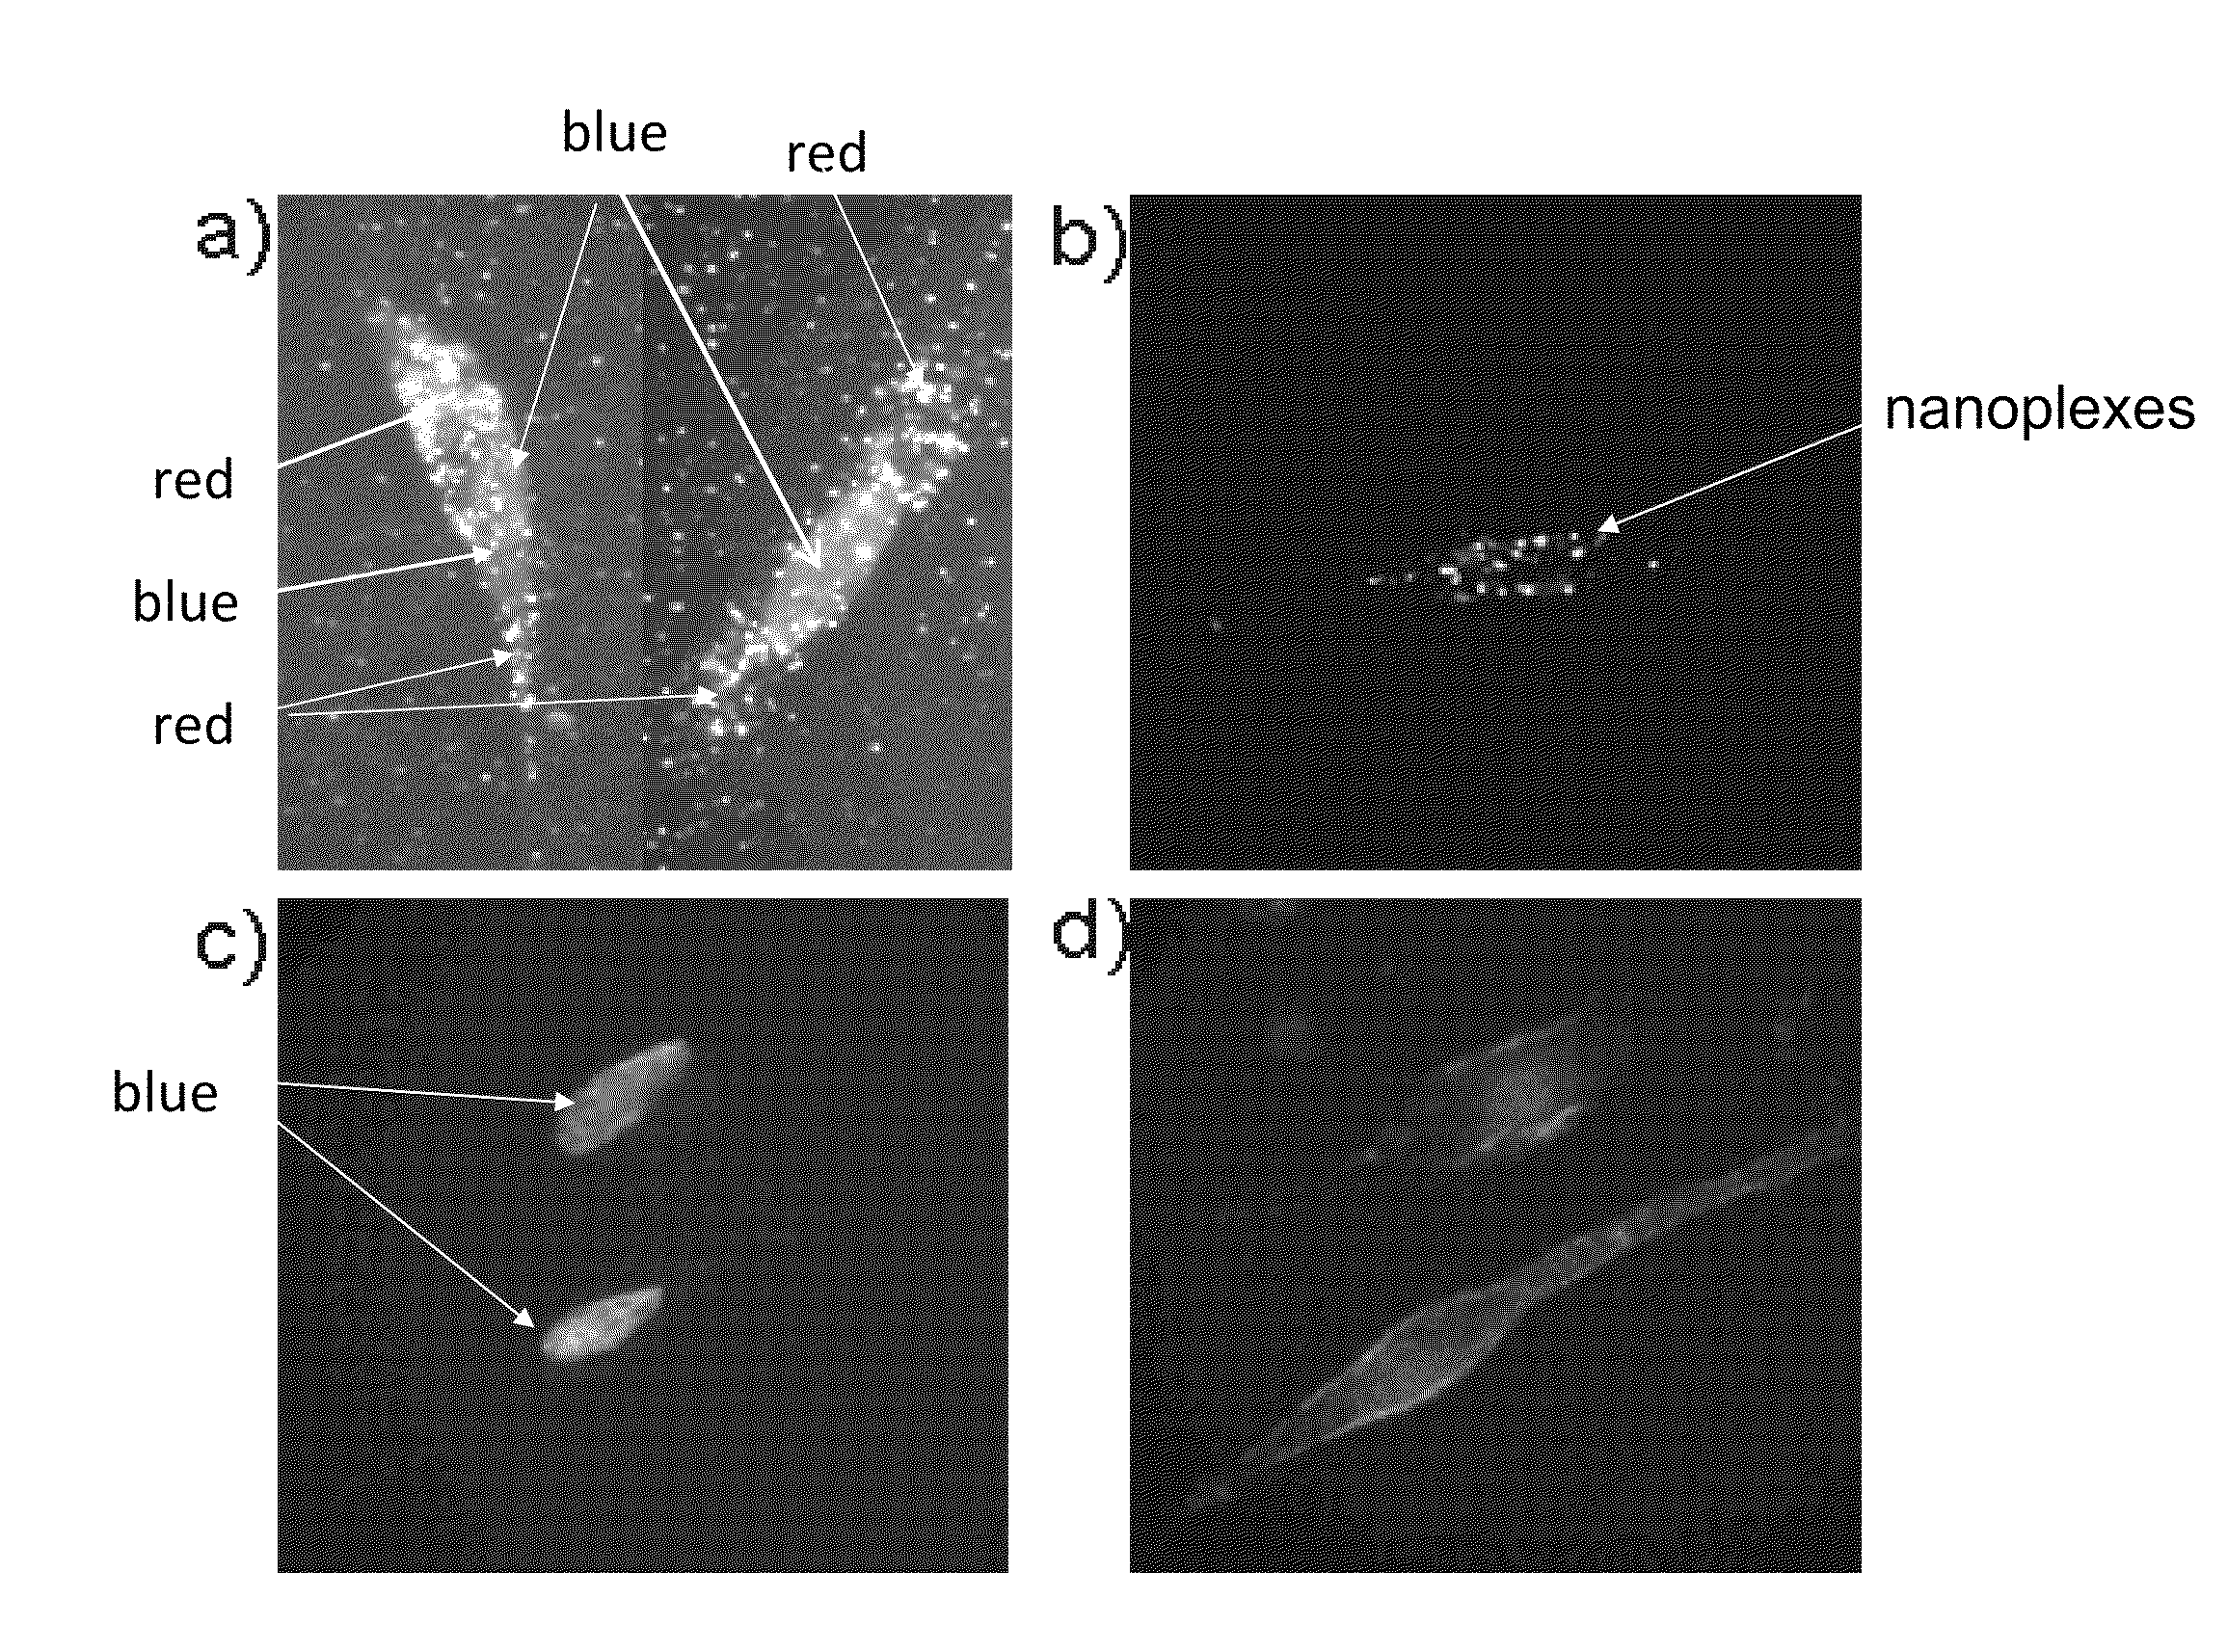 GOLD NANOROD-siRNA COMPLEXES AND METHODS OF USING SAME